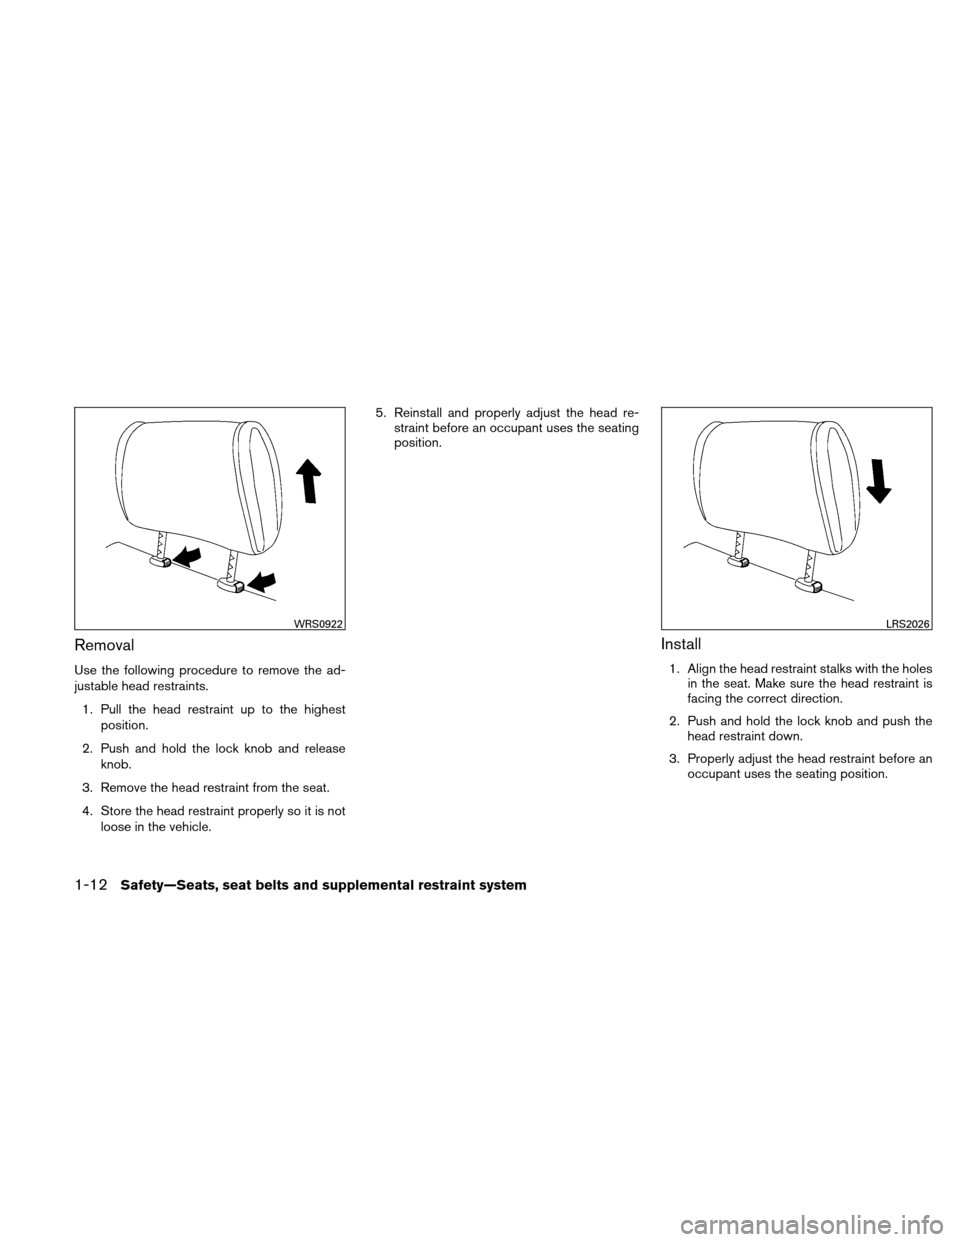 NISSAN ALTIMA COUPE 2011 D32 / 4.G Owners Guide Removal
Use the following procedure to remove the ad-
justable head restraints.1. Pull the head restraint up to the highest position.
2. Push and hold the lock knob and release knob.
3. Remove the hea